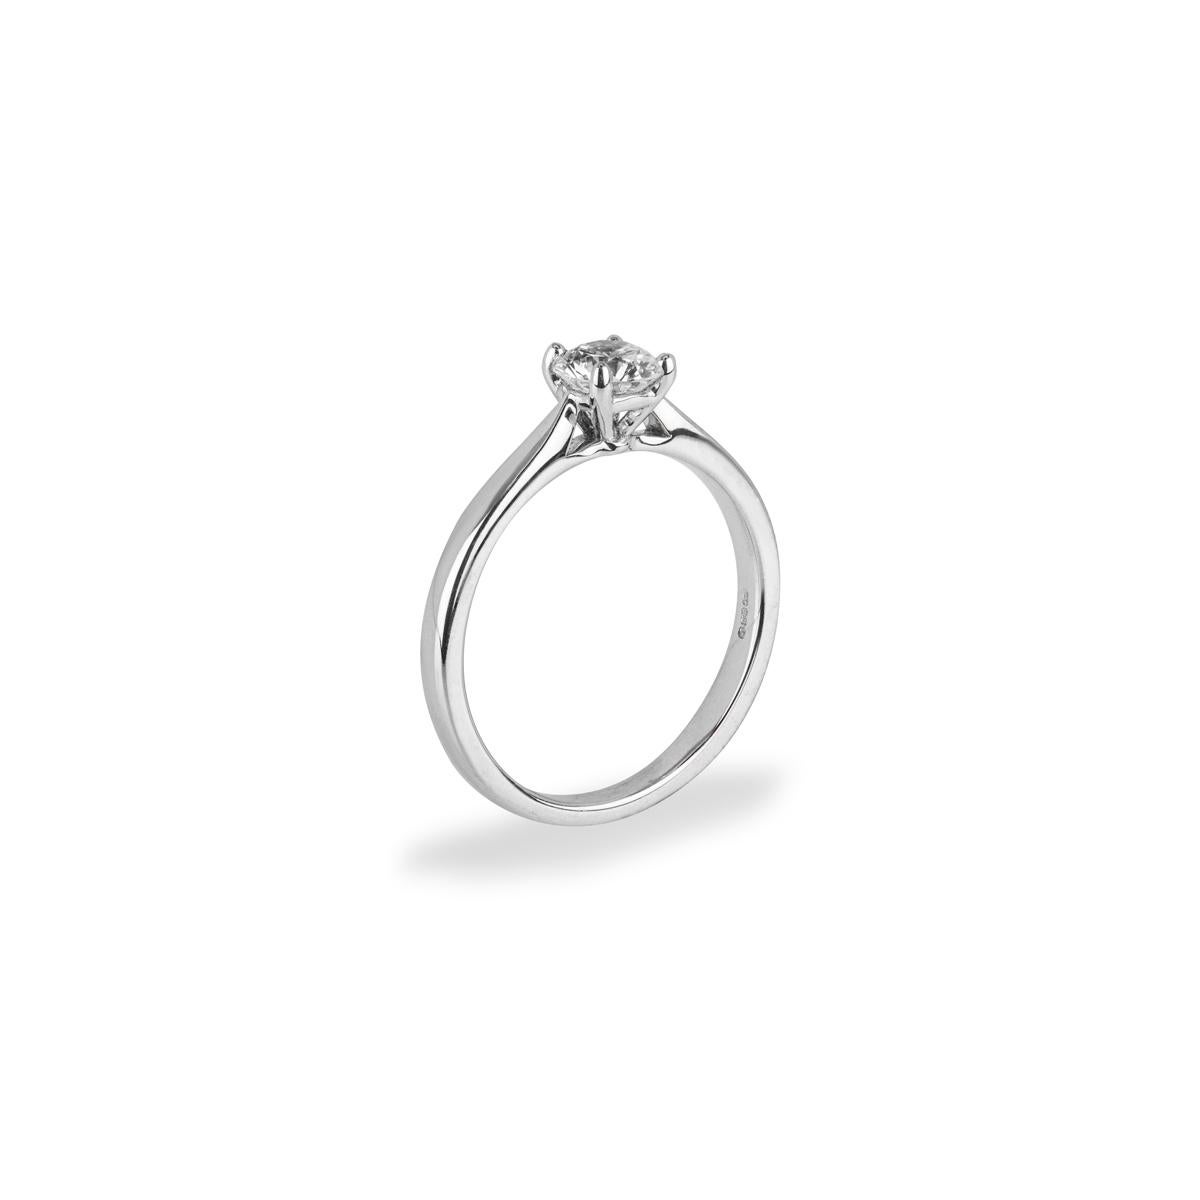 A classic 18k white gold diamond solitaire ring. The engagement ring is set to the centre with a round brilliant cut diamond in a four claw mount, weighing 0.59ct, G colour VS2 clarity. The 2mm solitaire has a gross weight of 2.92 grams and is